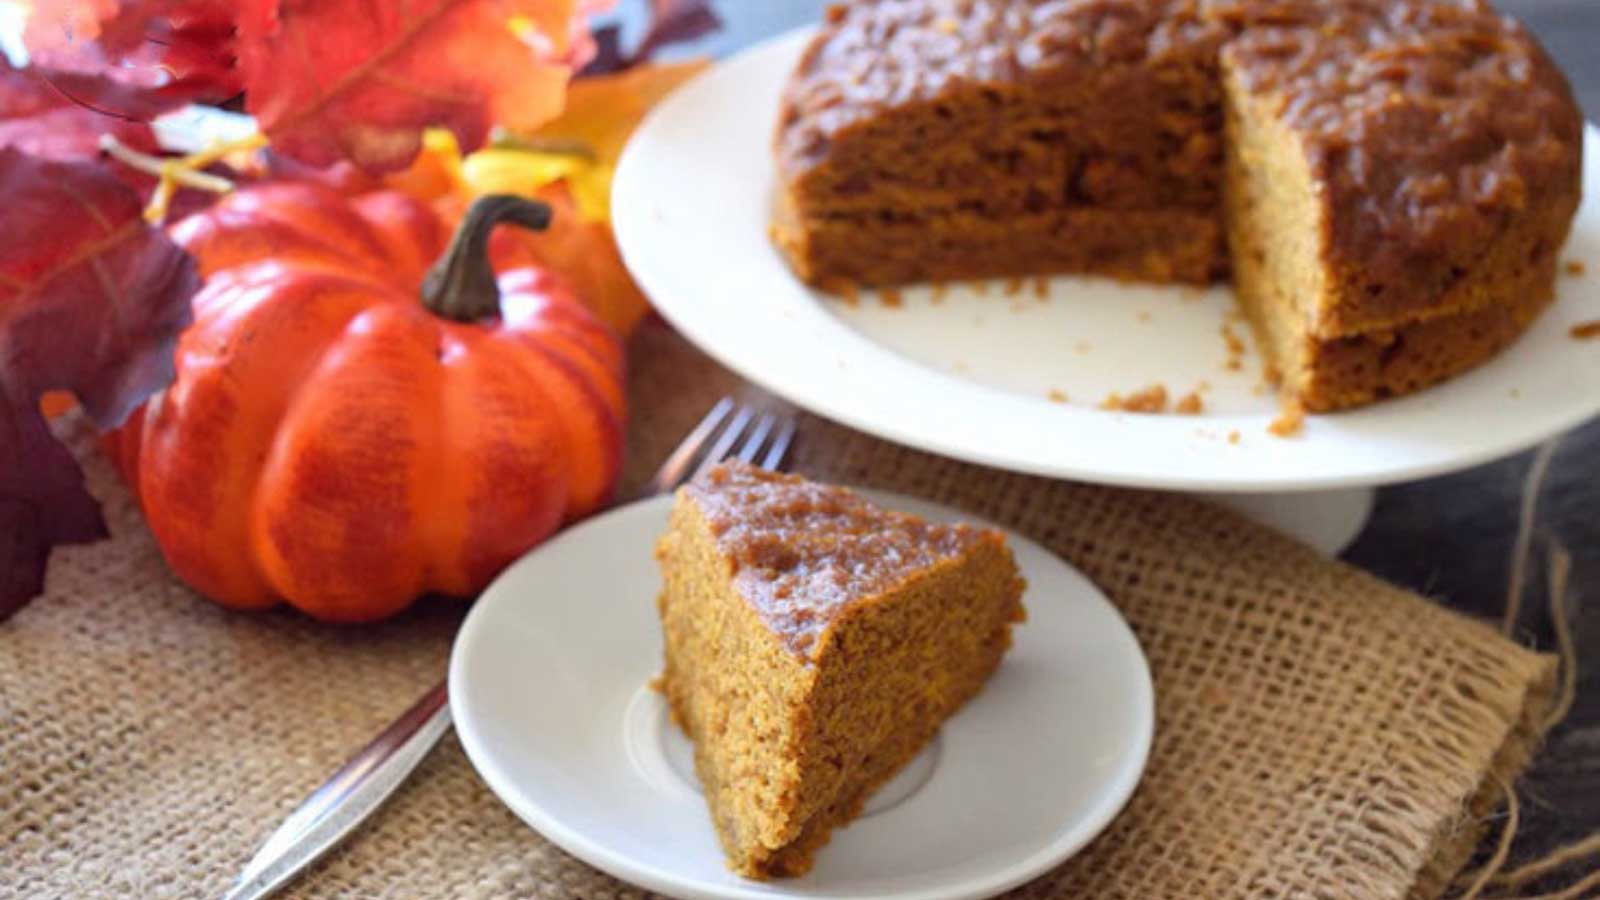 A slice of Pressure Cooker Pumpkin Spice Cake on a white plate.